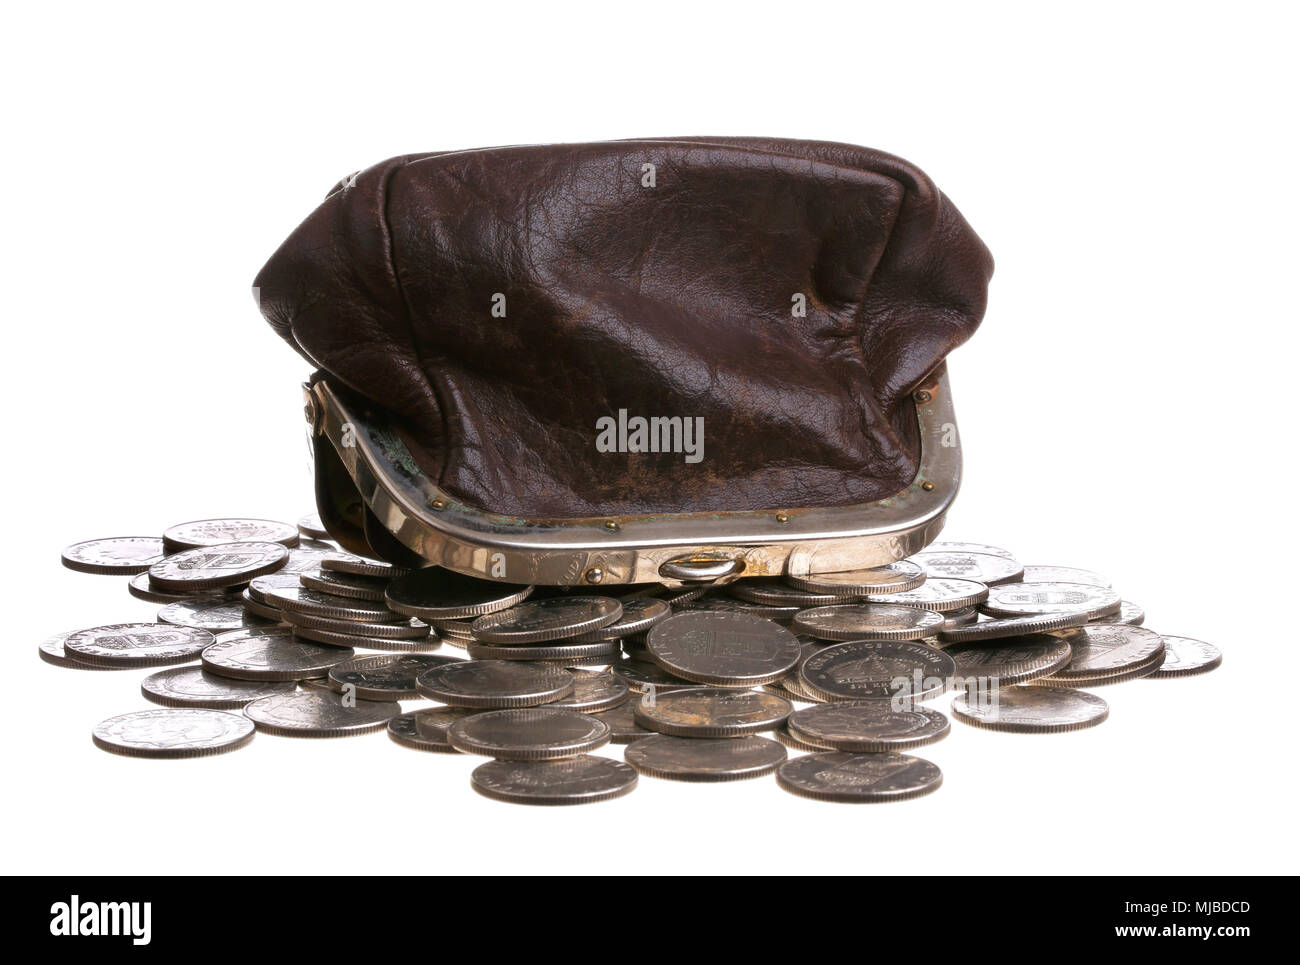 A brown purse upside down on top of a pile of Swedishcoins, isolated on white background. Stock Photo